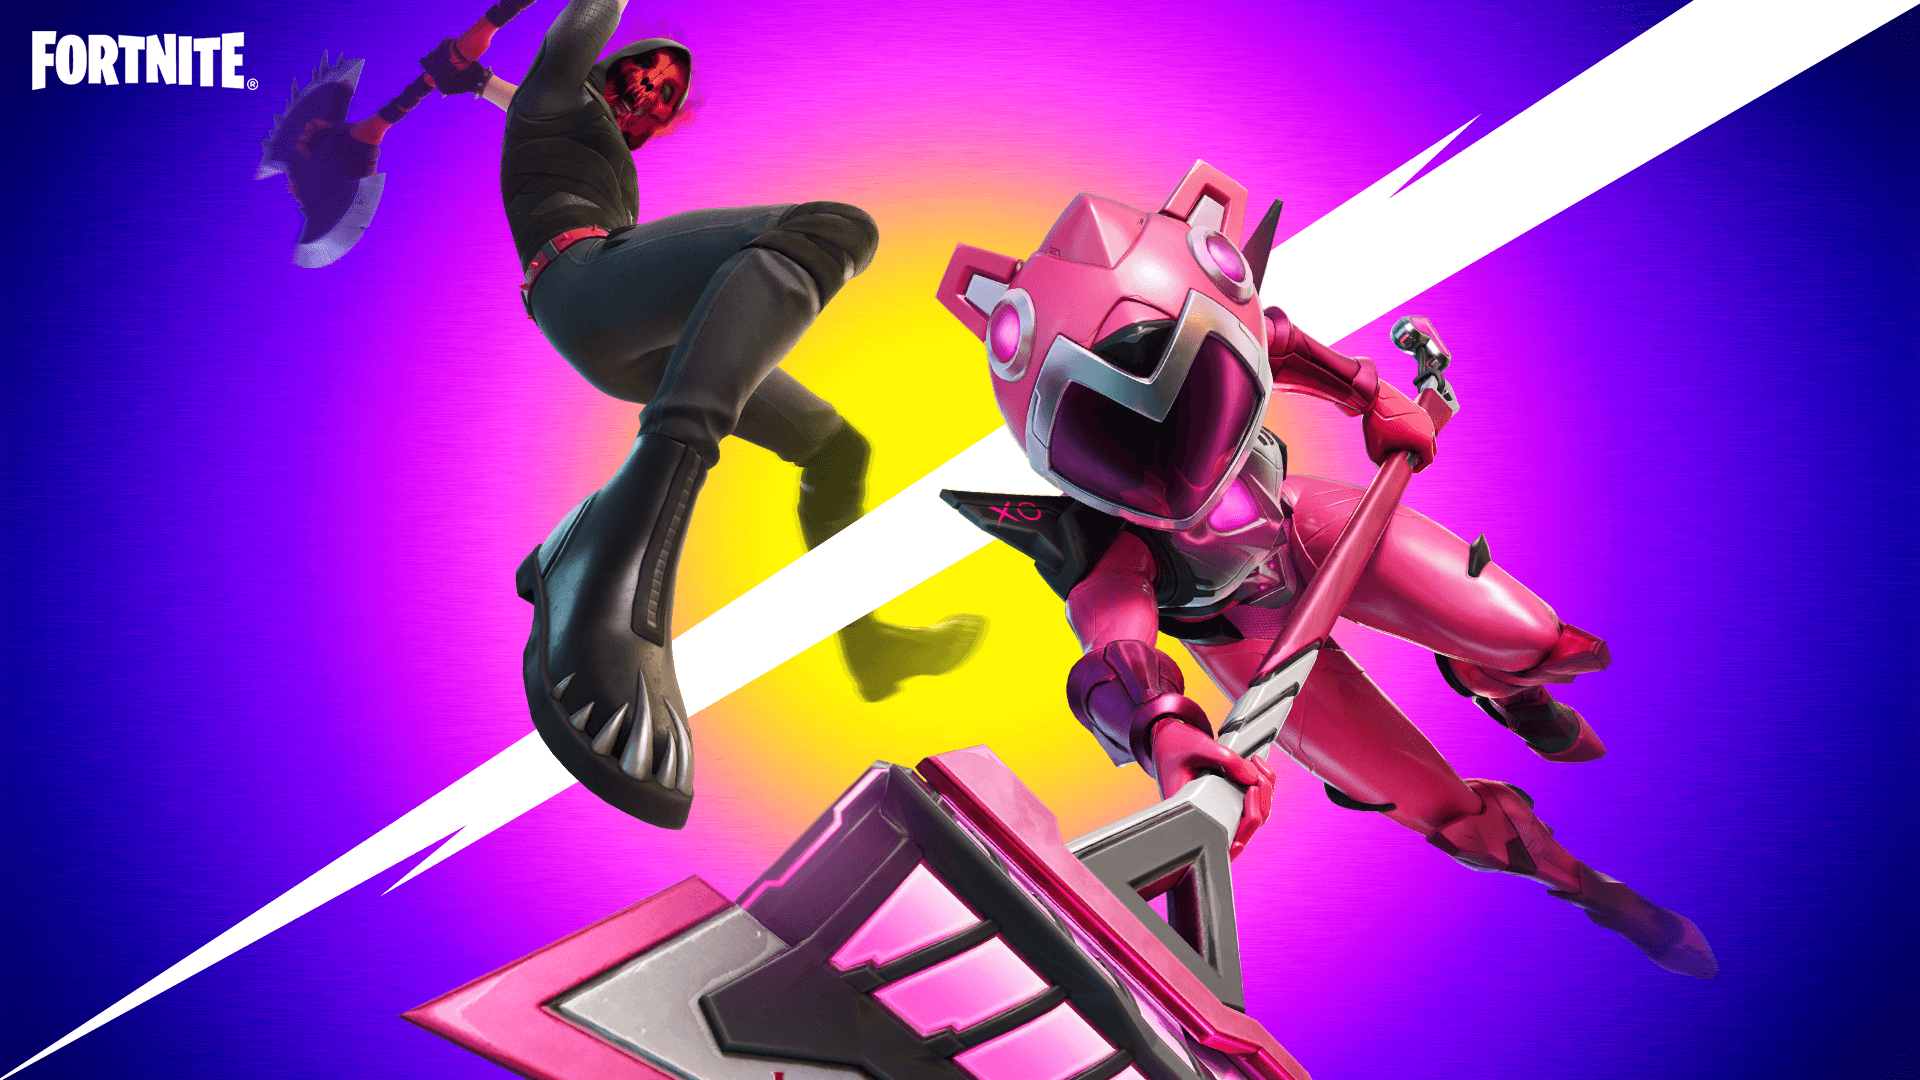 Fortnite Patch v17.30: What's New?